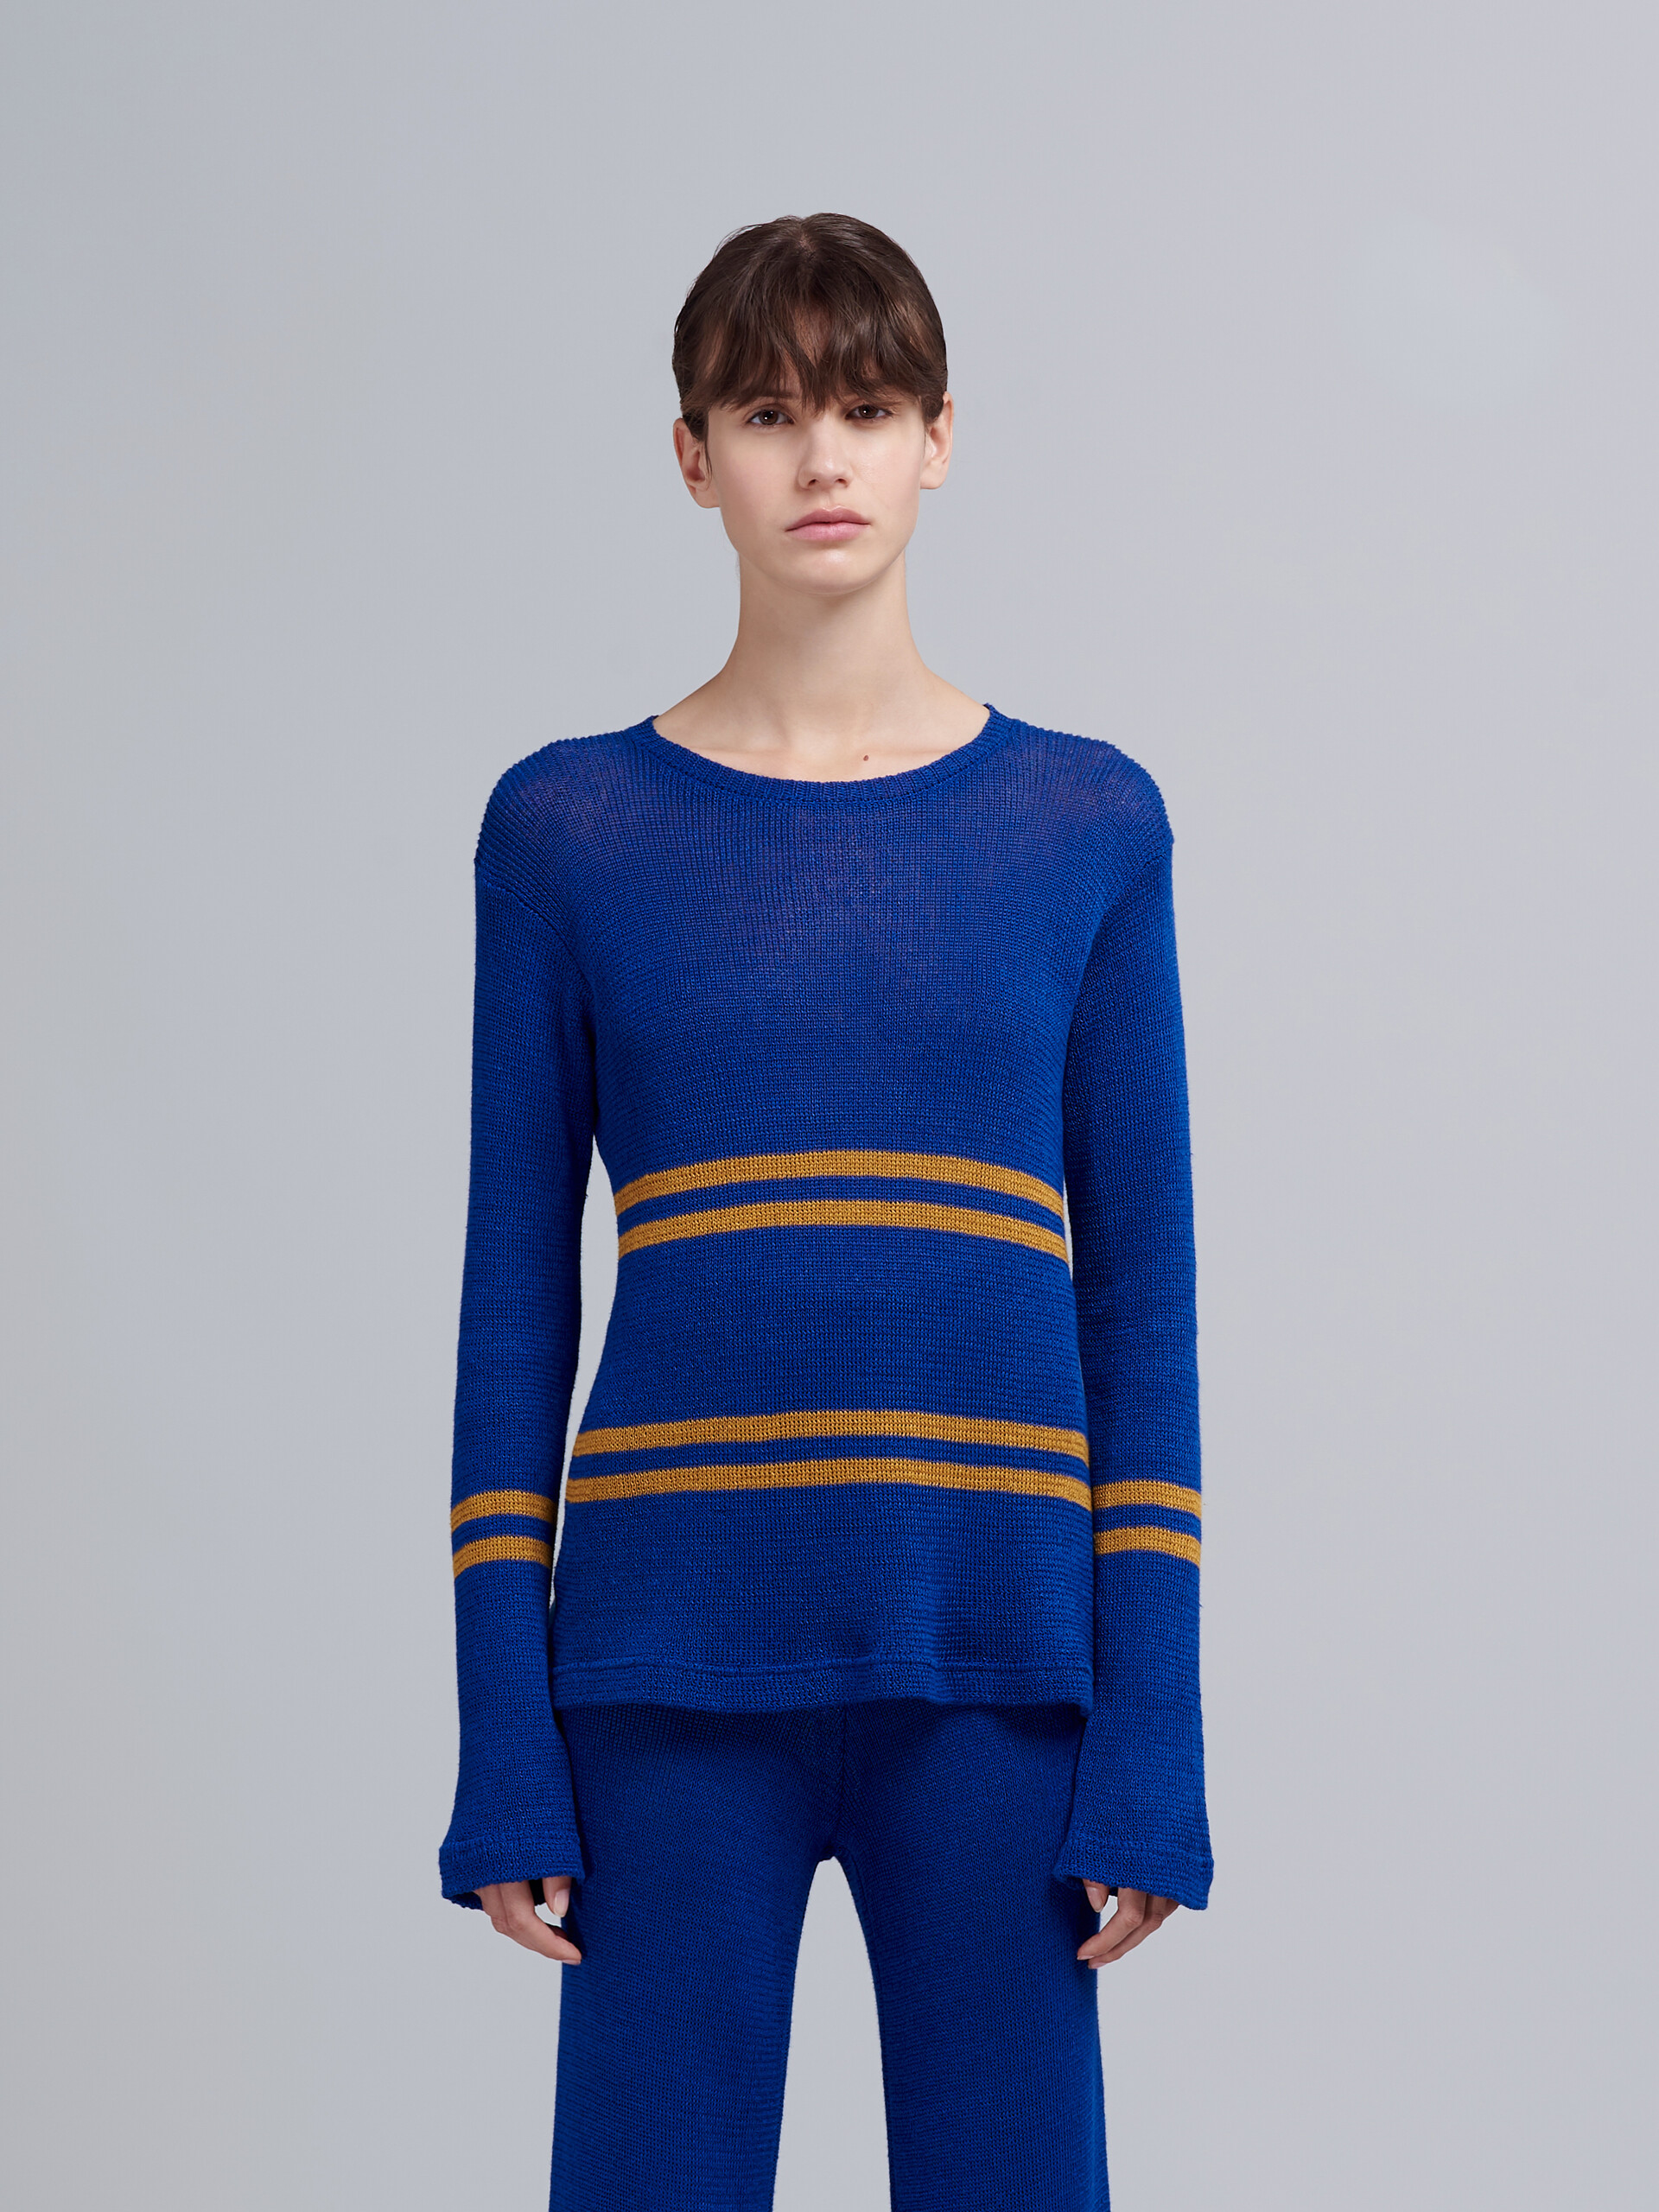 Striped linen sweater - Pullovers - Image 2